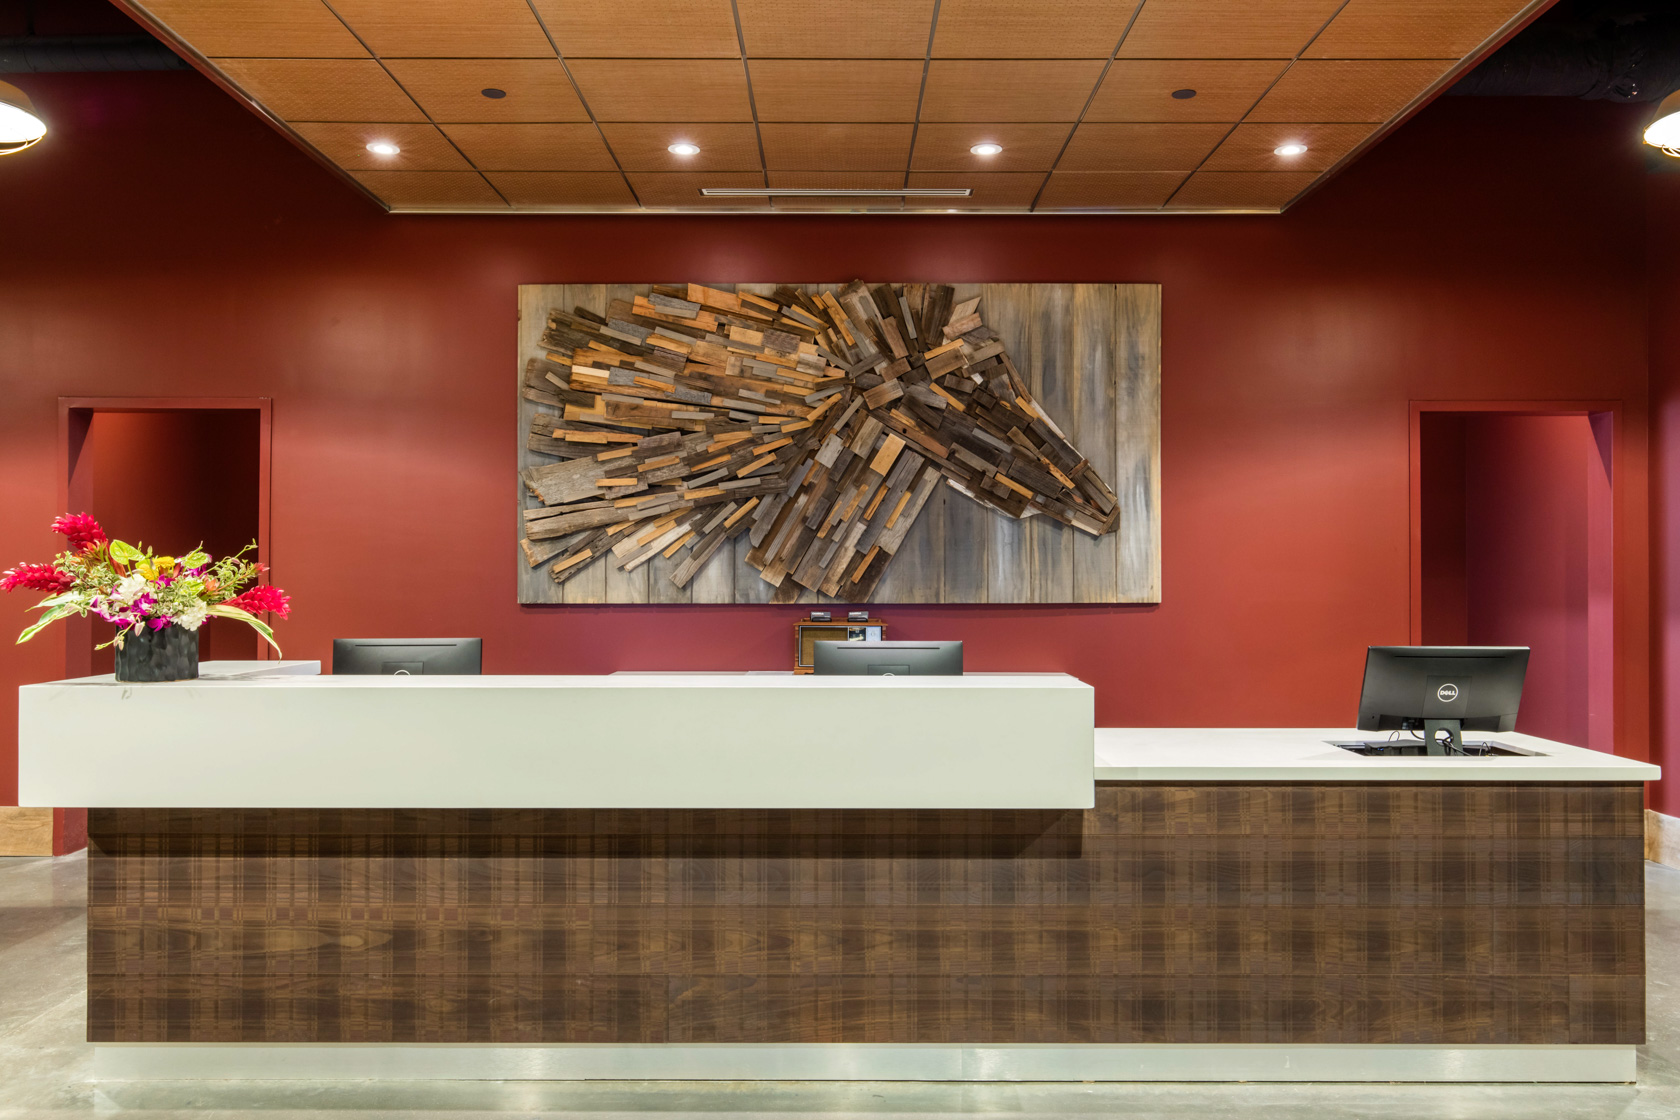 gallery Reception of a hotel with features as a red wall, elegant big paint and three desktops at nighttime